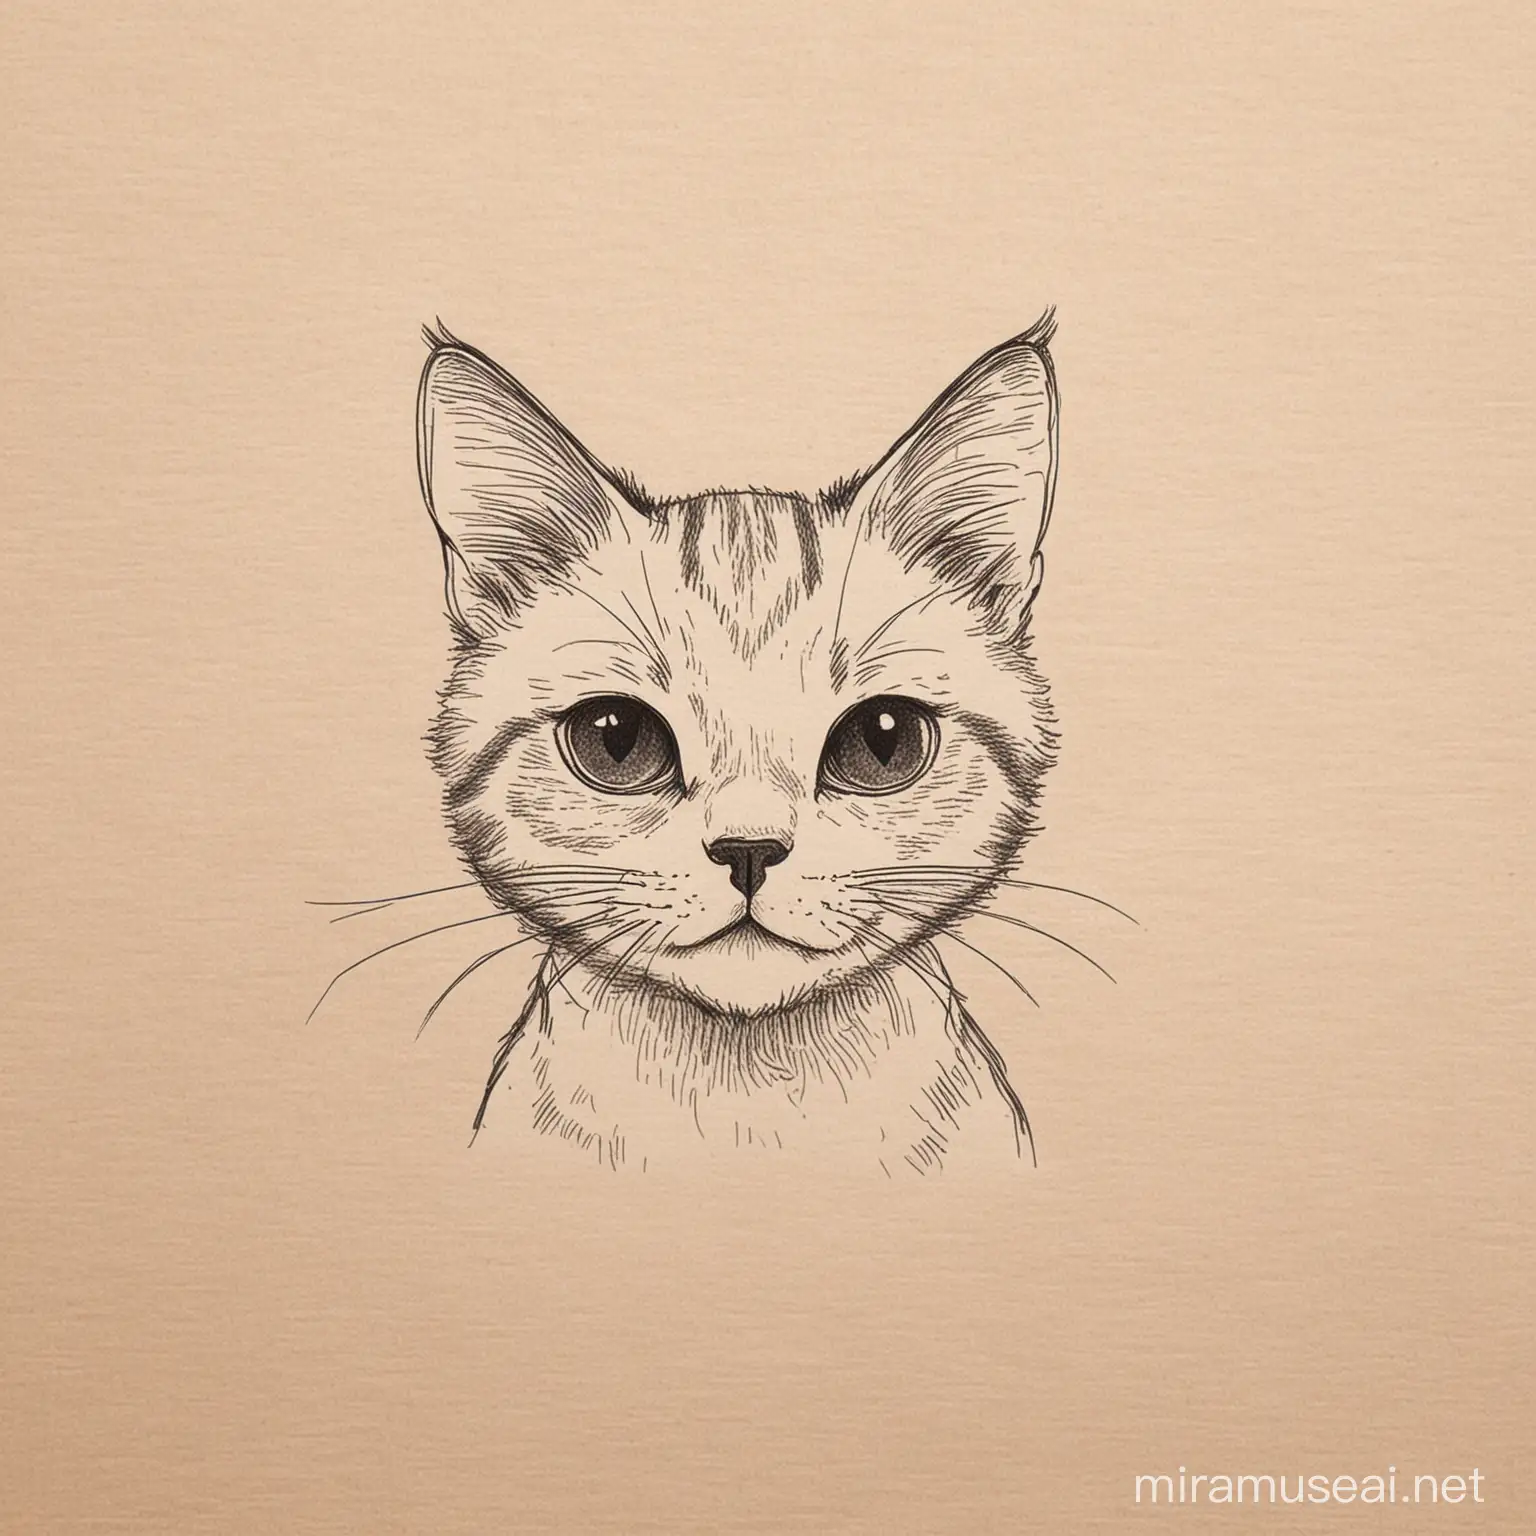 Minimalist Whiskers and Ears Cat Sketch for CatInspired Etsy Shop